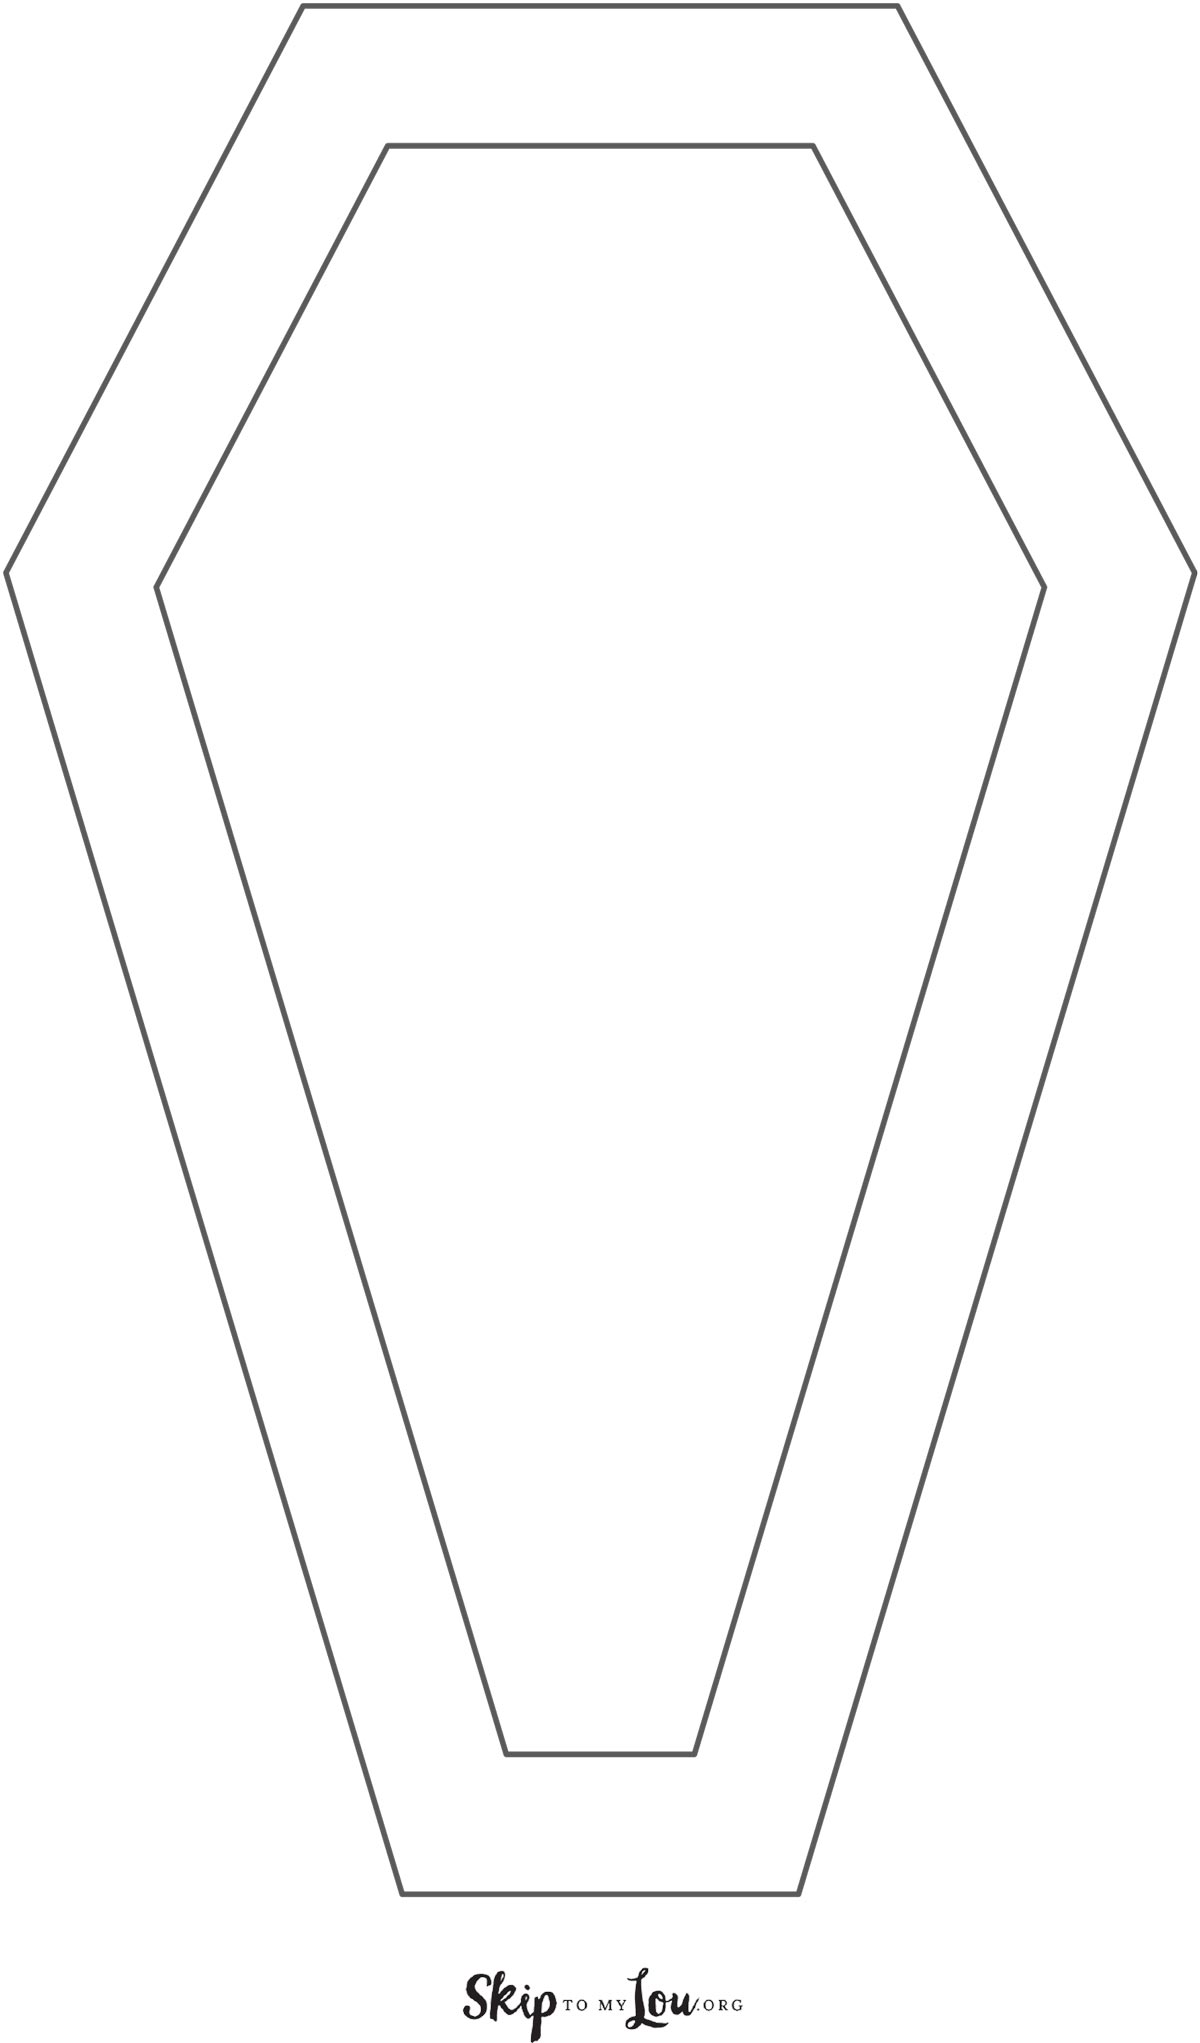 Halloween template 8 - coffin outline